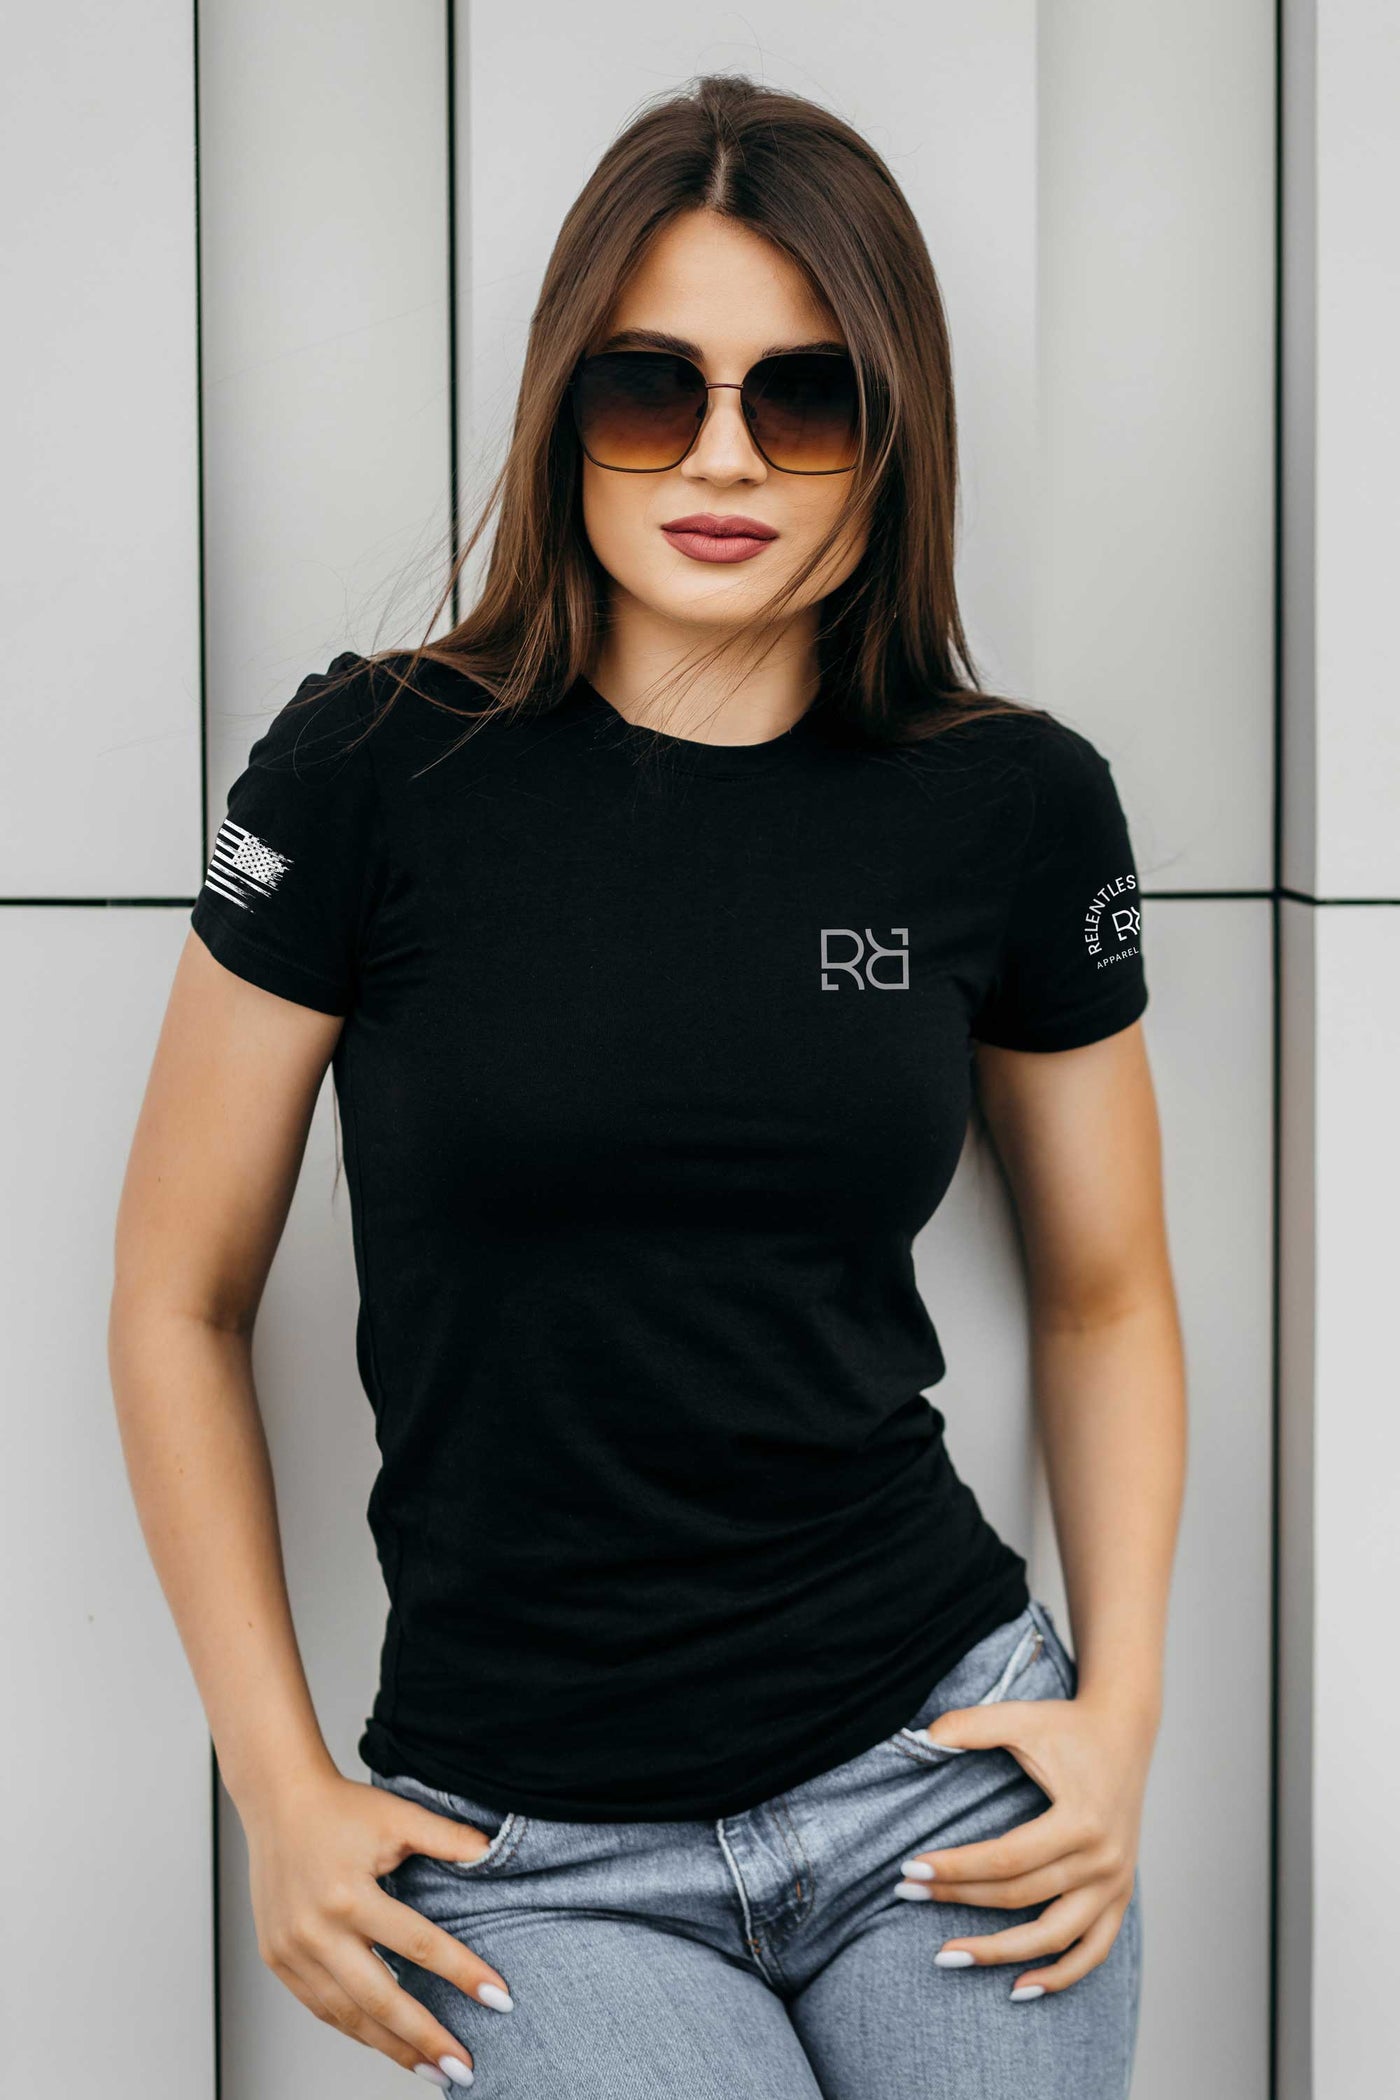 Woman wearing Built Different t-shirt showing front of tee